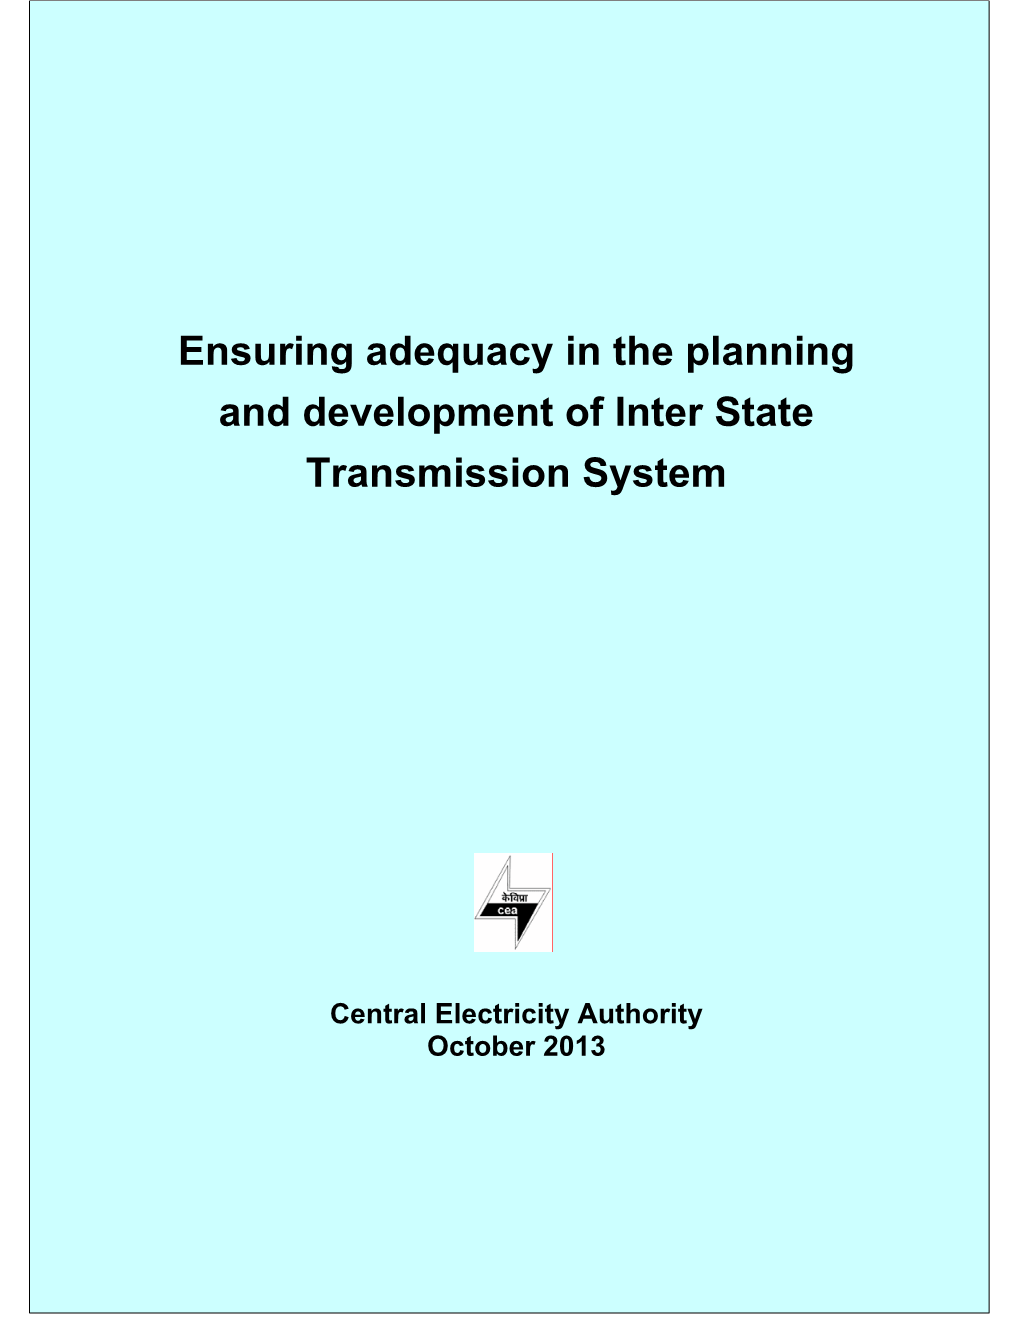 Ensuring Adequacy in the Planning and Development of Inter State Transmission System